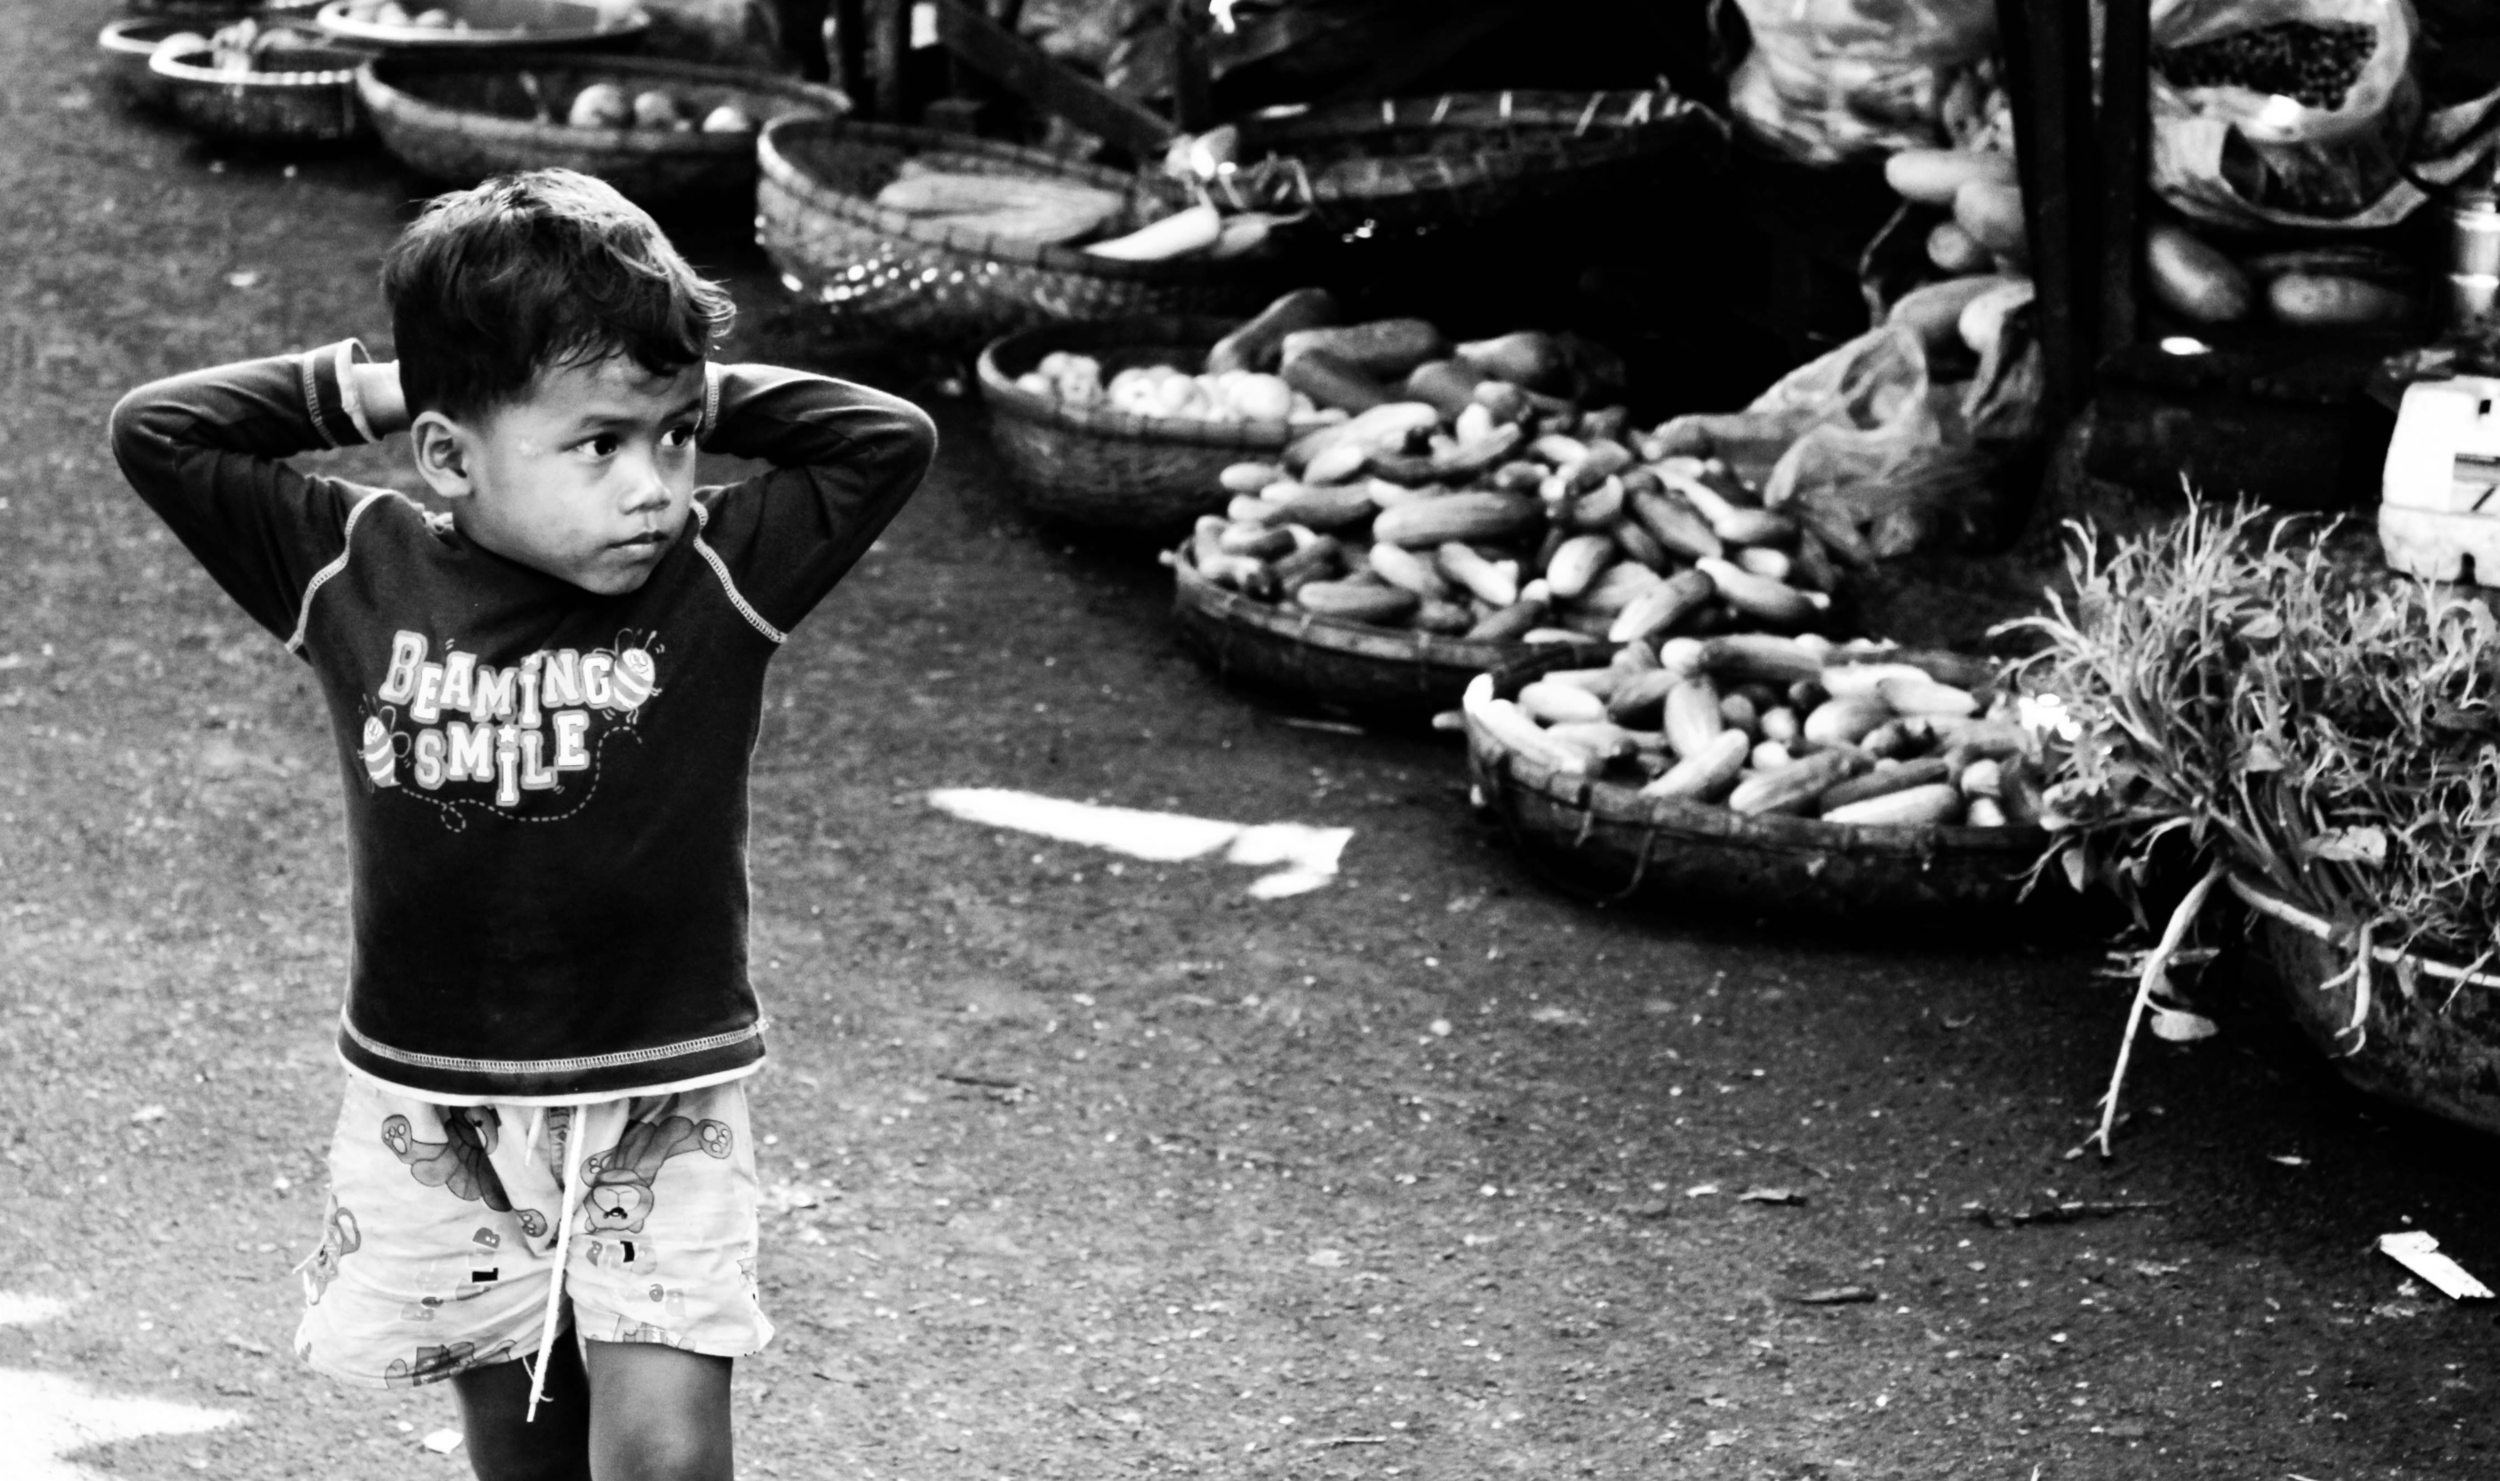  ChildSafe International estimates Phnom Penh has 20,000 street children. The very young scavenge, beg, or work as vendors while older street children are frequently involved in hard labor, drug peddling, prostitution, and selling their blood. Many s